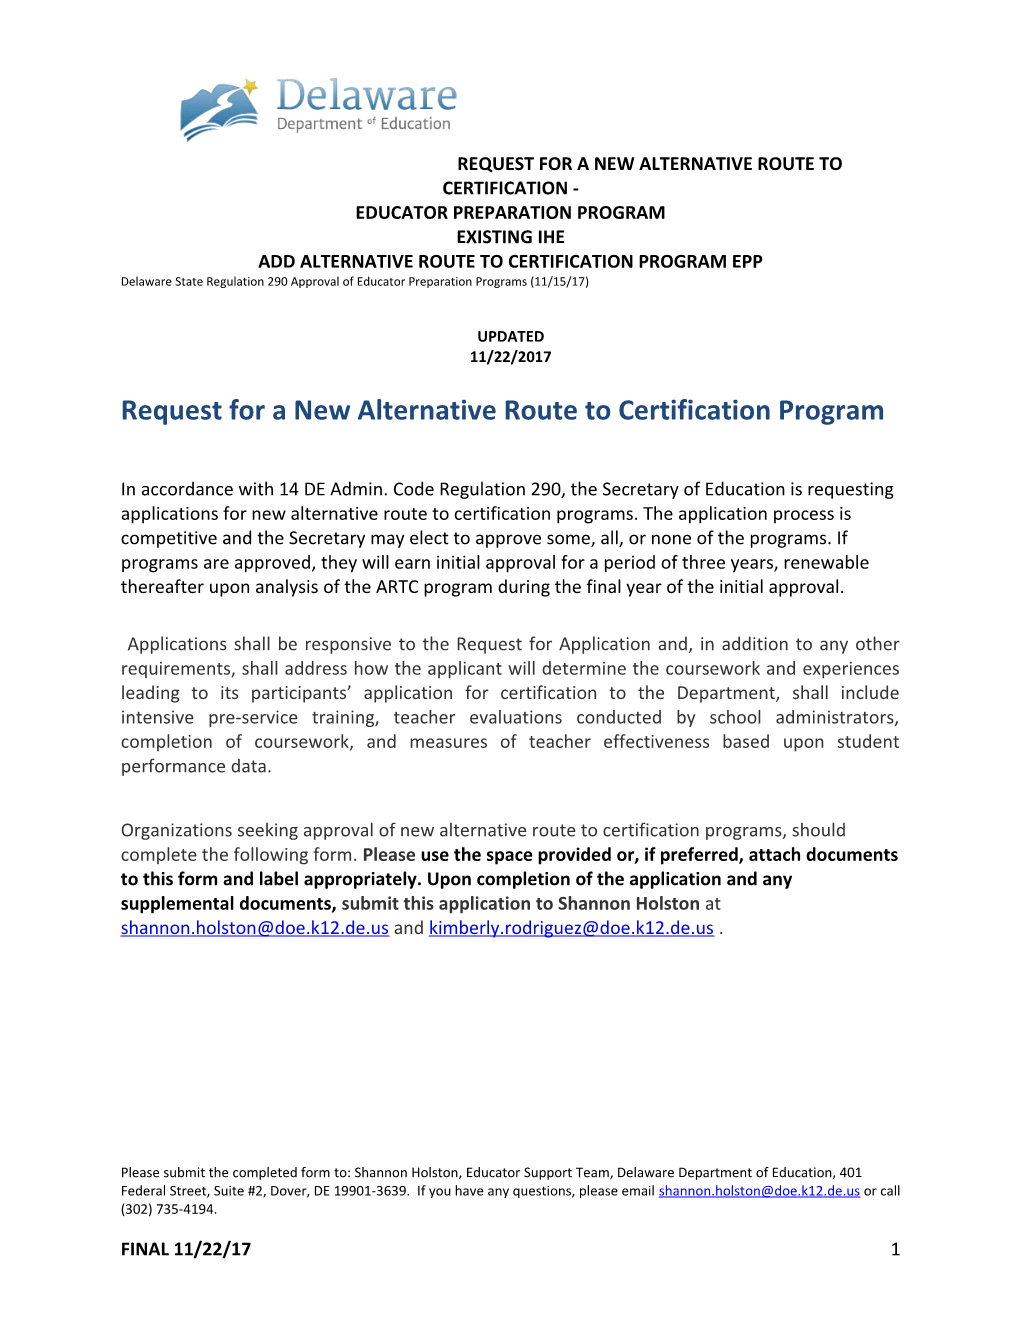 Request for a New Alternative Route to Certification Program